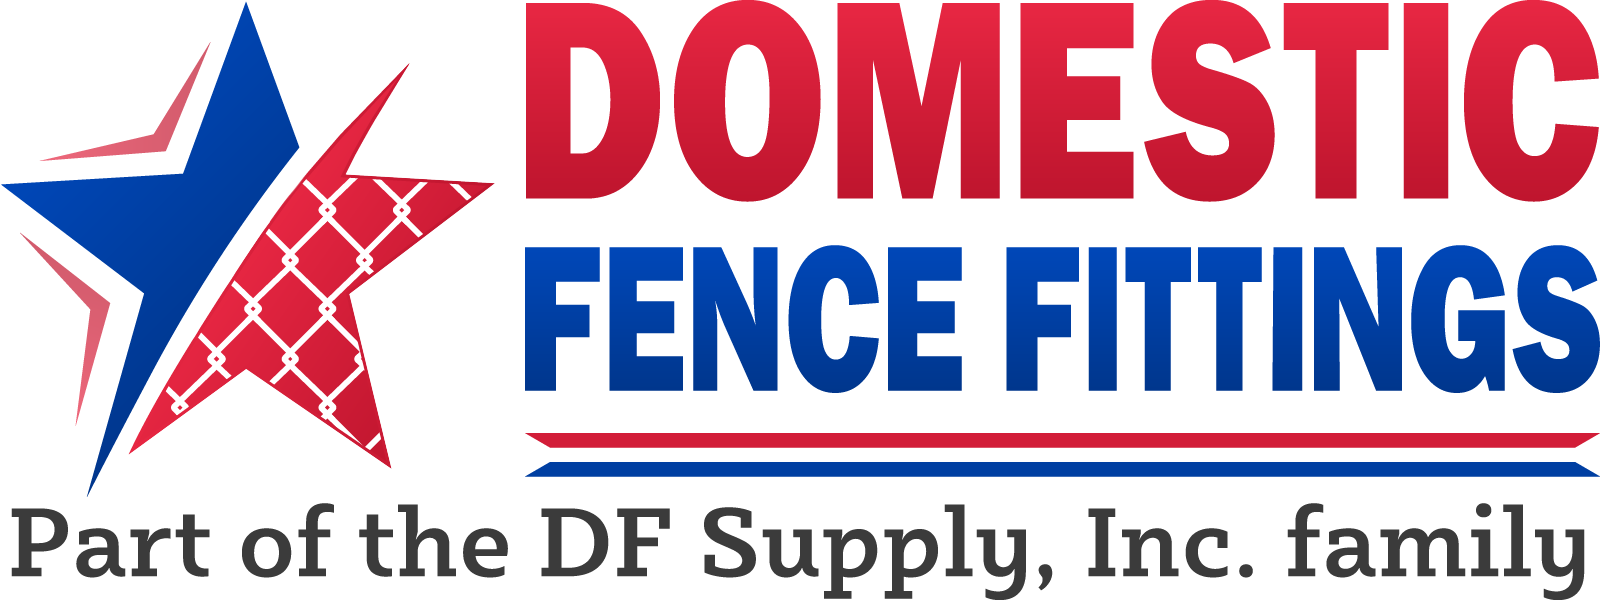 Domestic Fence Fittings